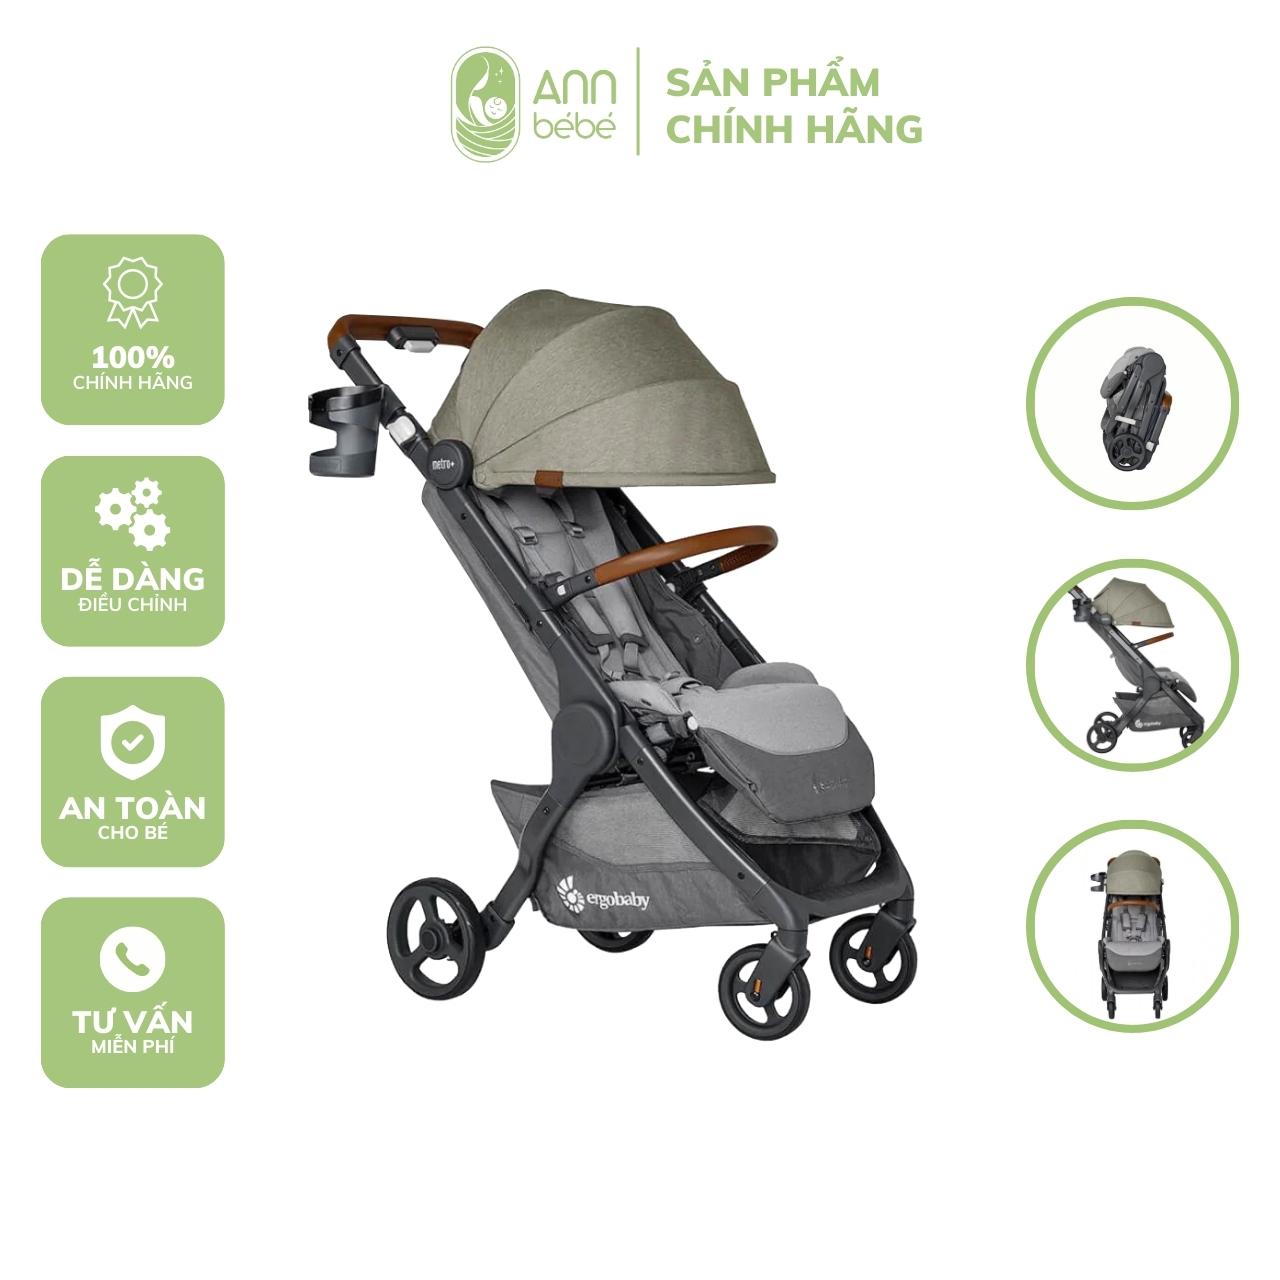 Xe đẩy gấp gọn Ergo baby Metro plus Deluxe Màu Empire State Green ANNBEBE